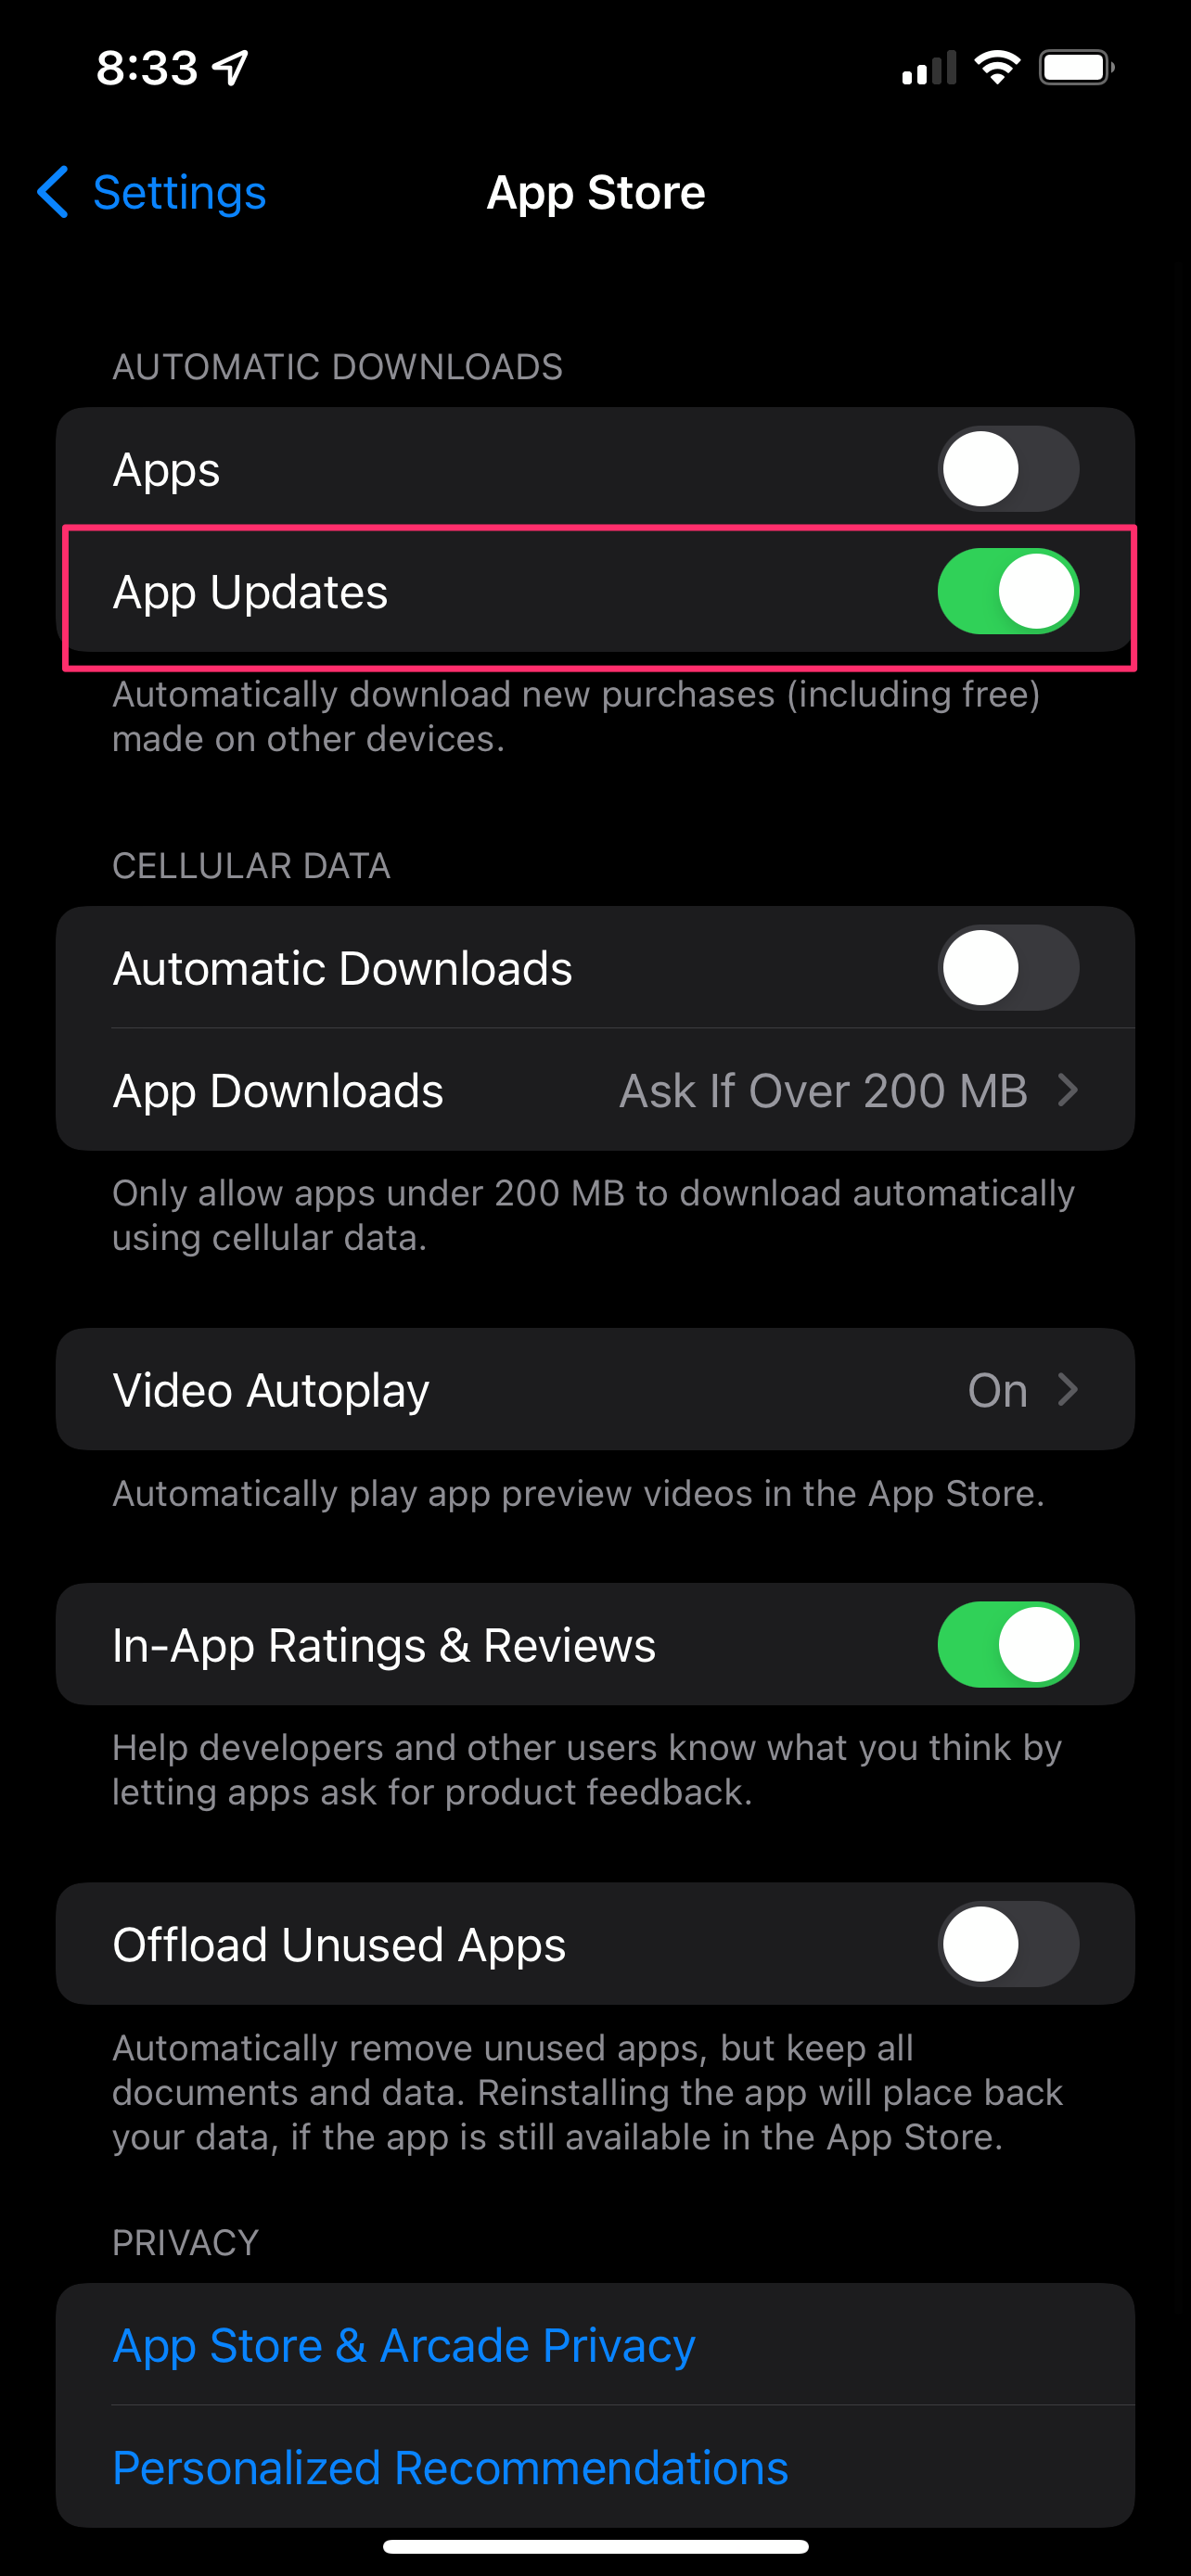 In the Automatic Downloads section of the App Store settings screen, turn off the App Updates toggle.